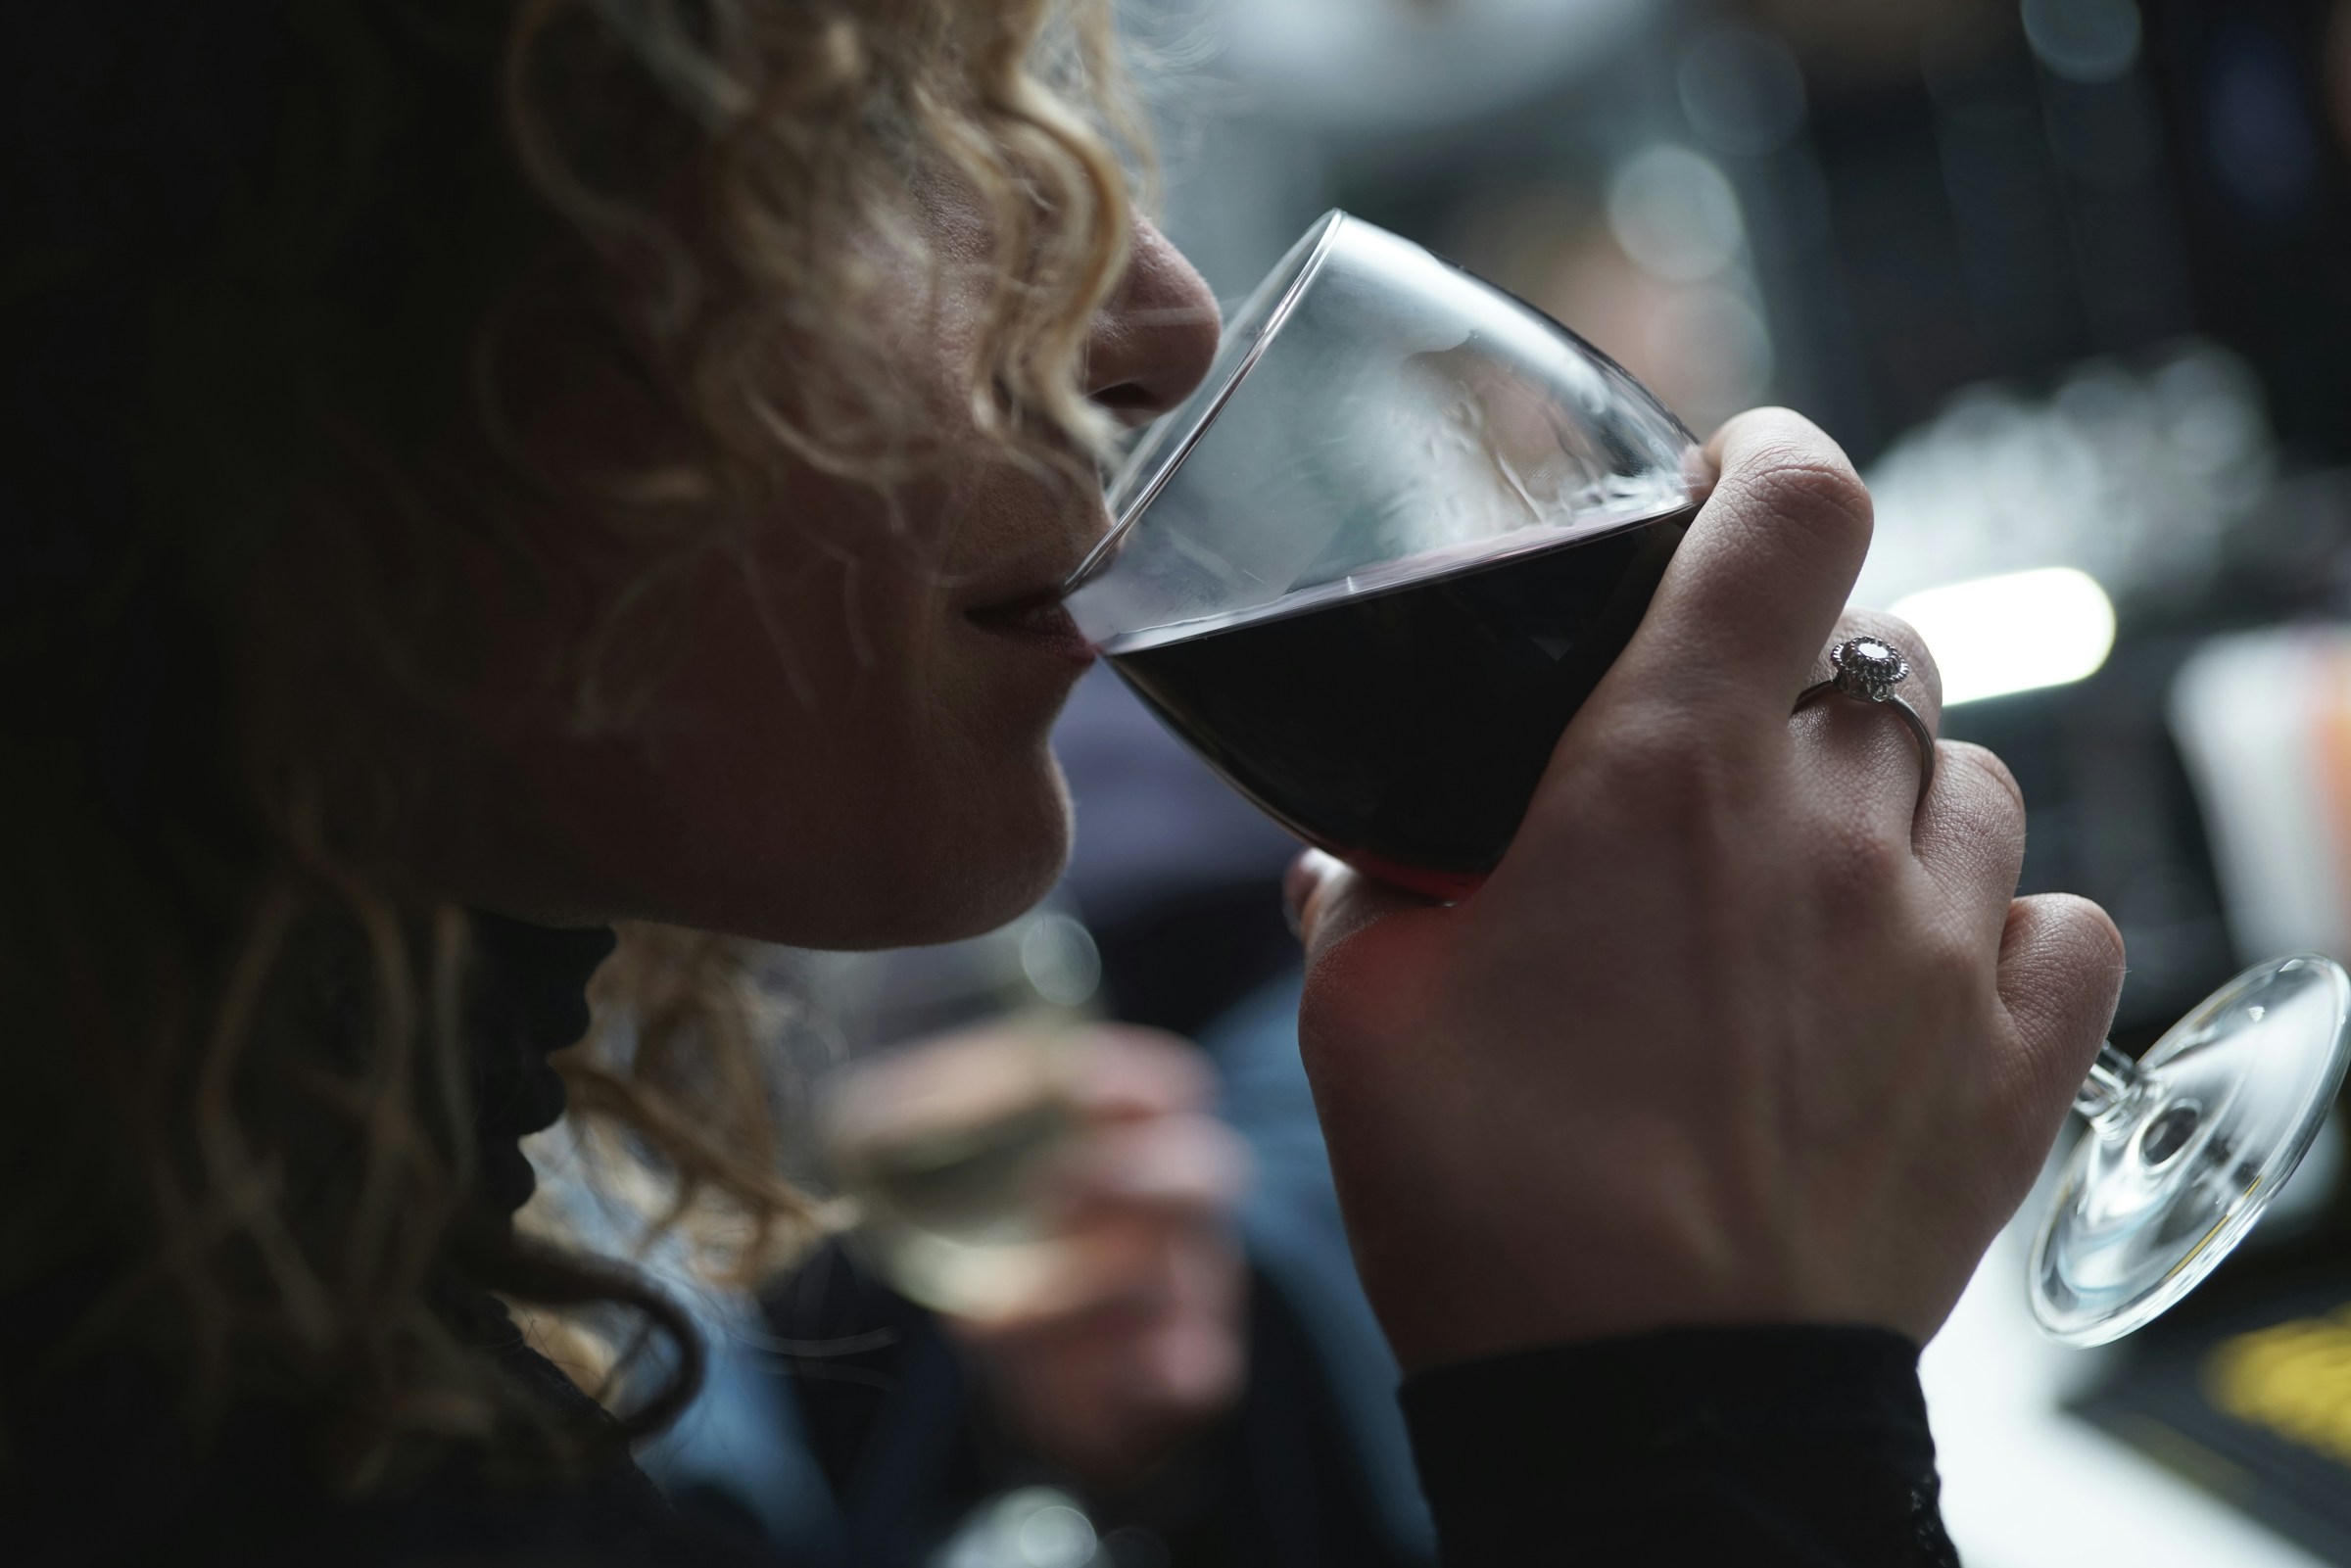 A woman drinking a glass of wine | Source: Unsplash